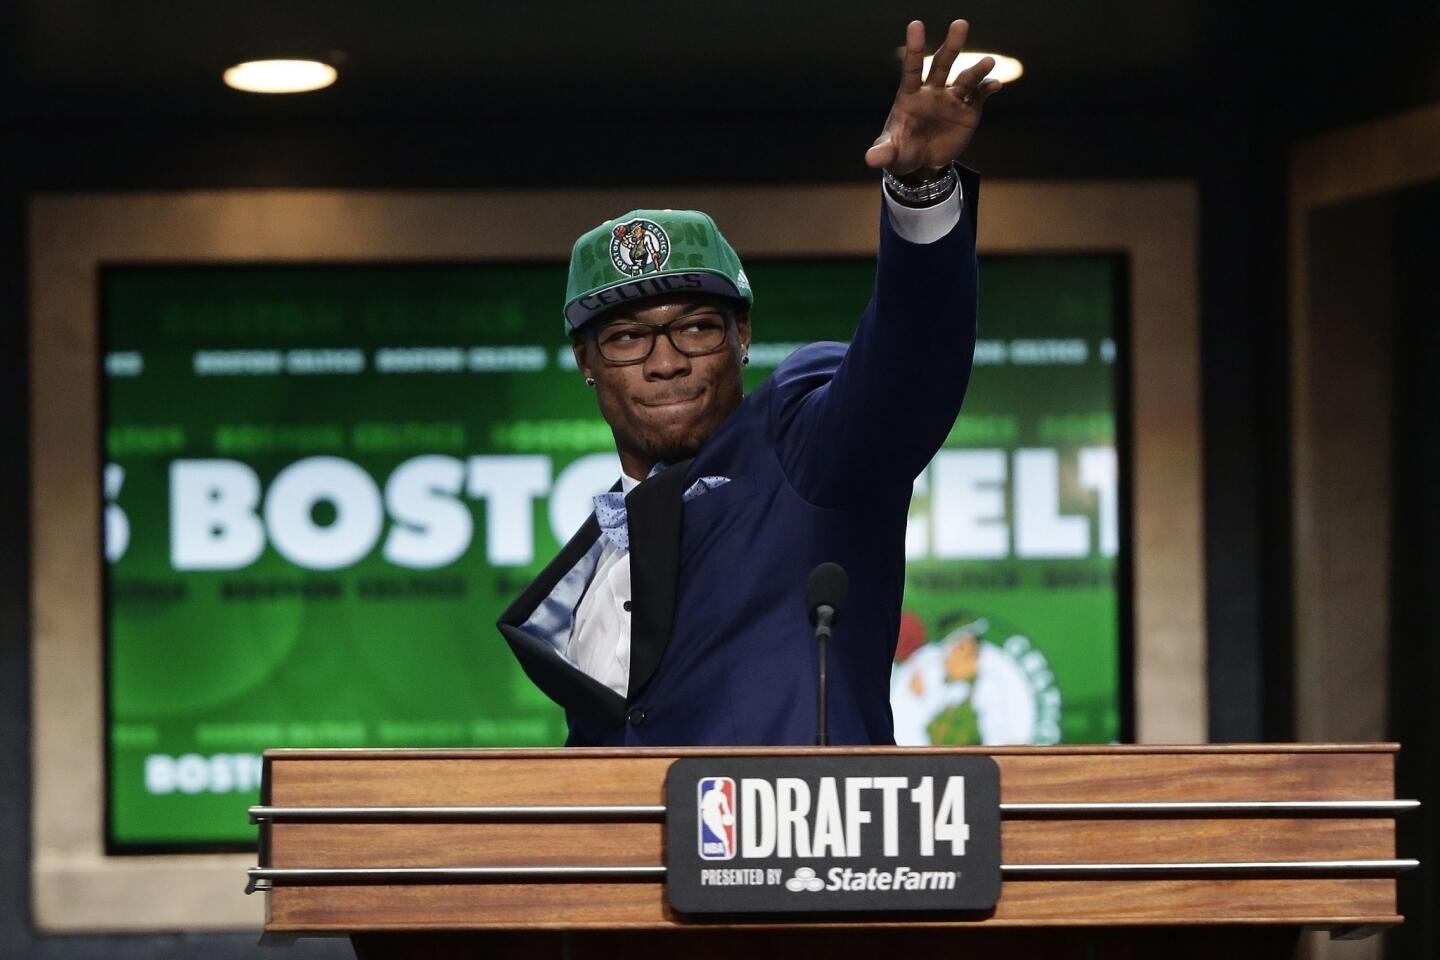 GQ's #1 Pick in the NBA Style Draft: Andrew Wiggins